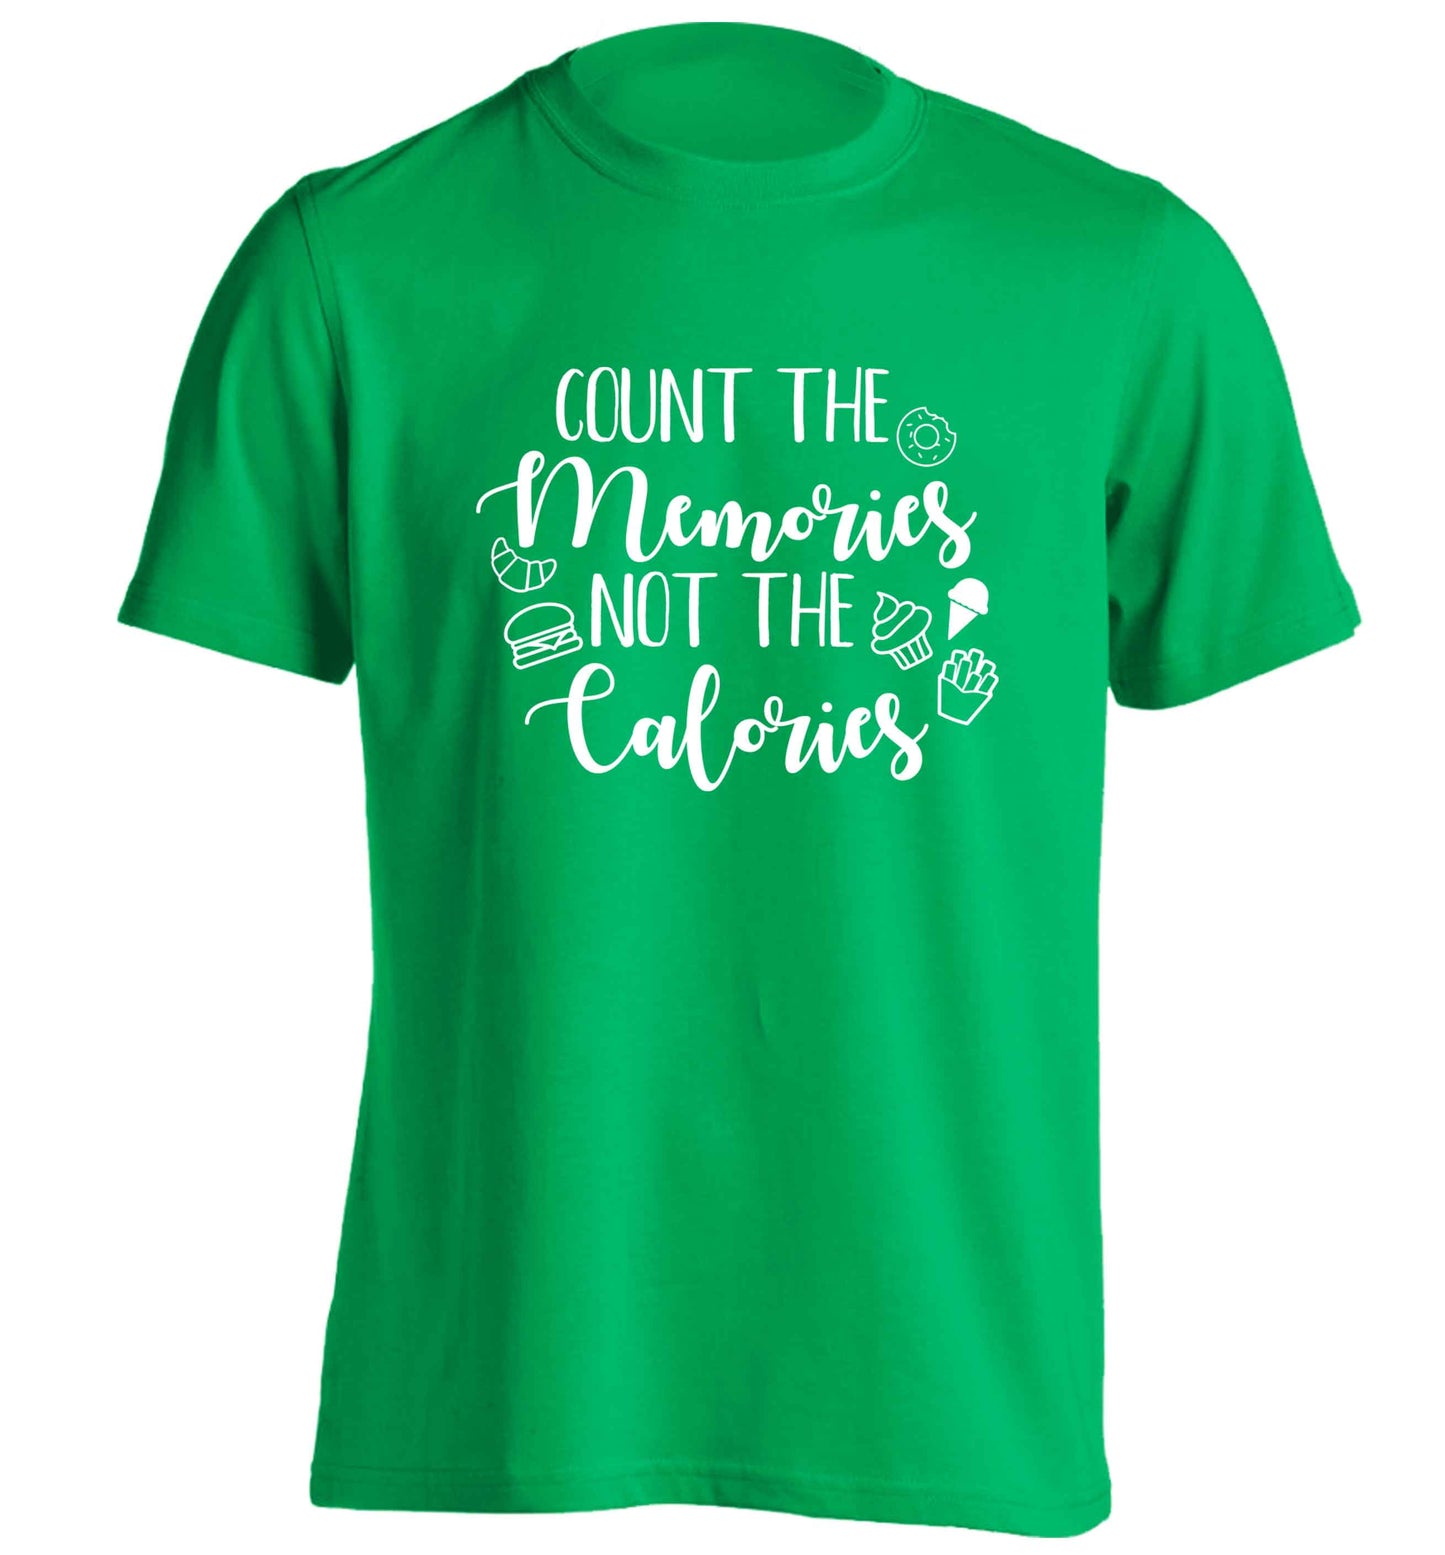 Count the memories not the calories adults unisex green Tshirt 2XL